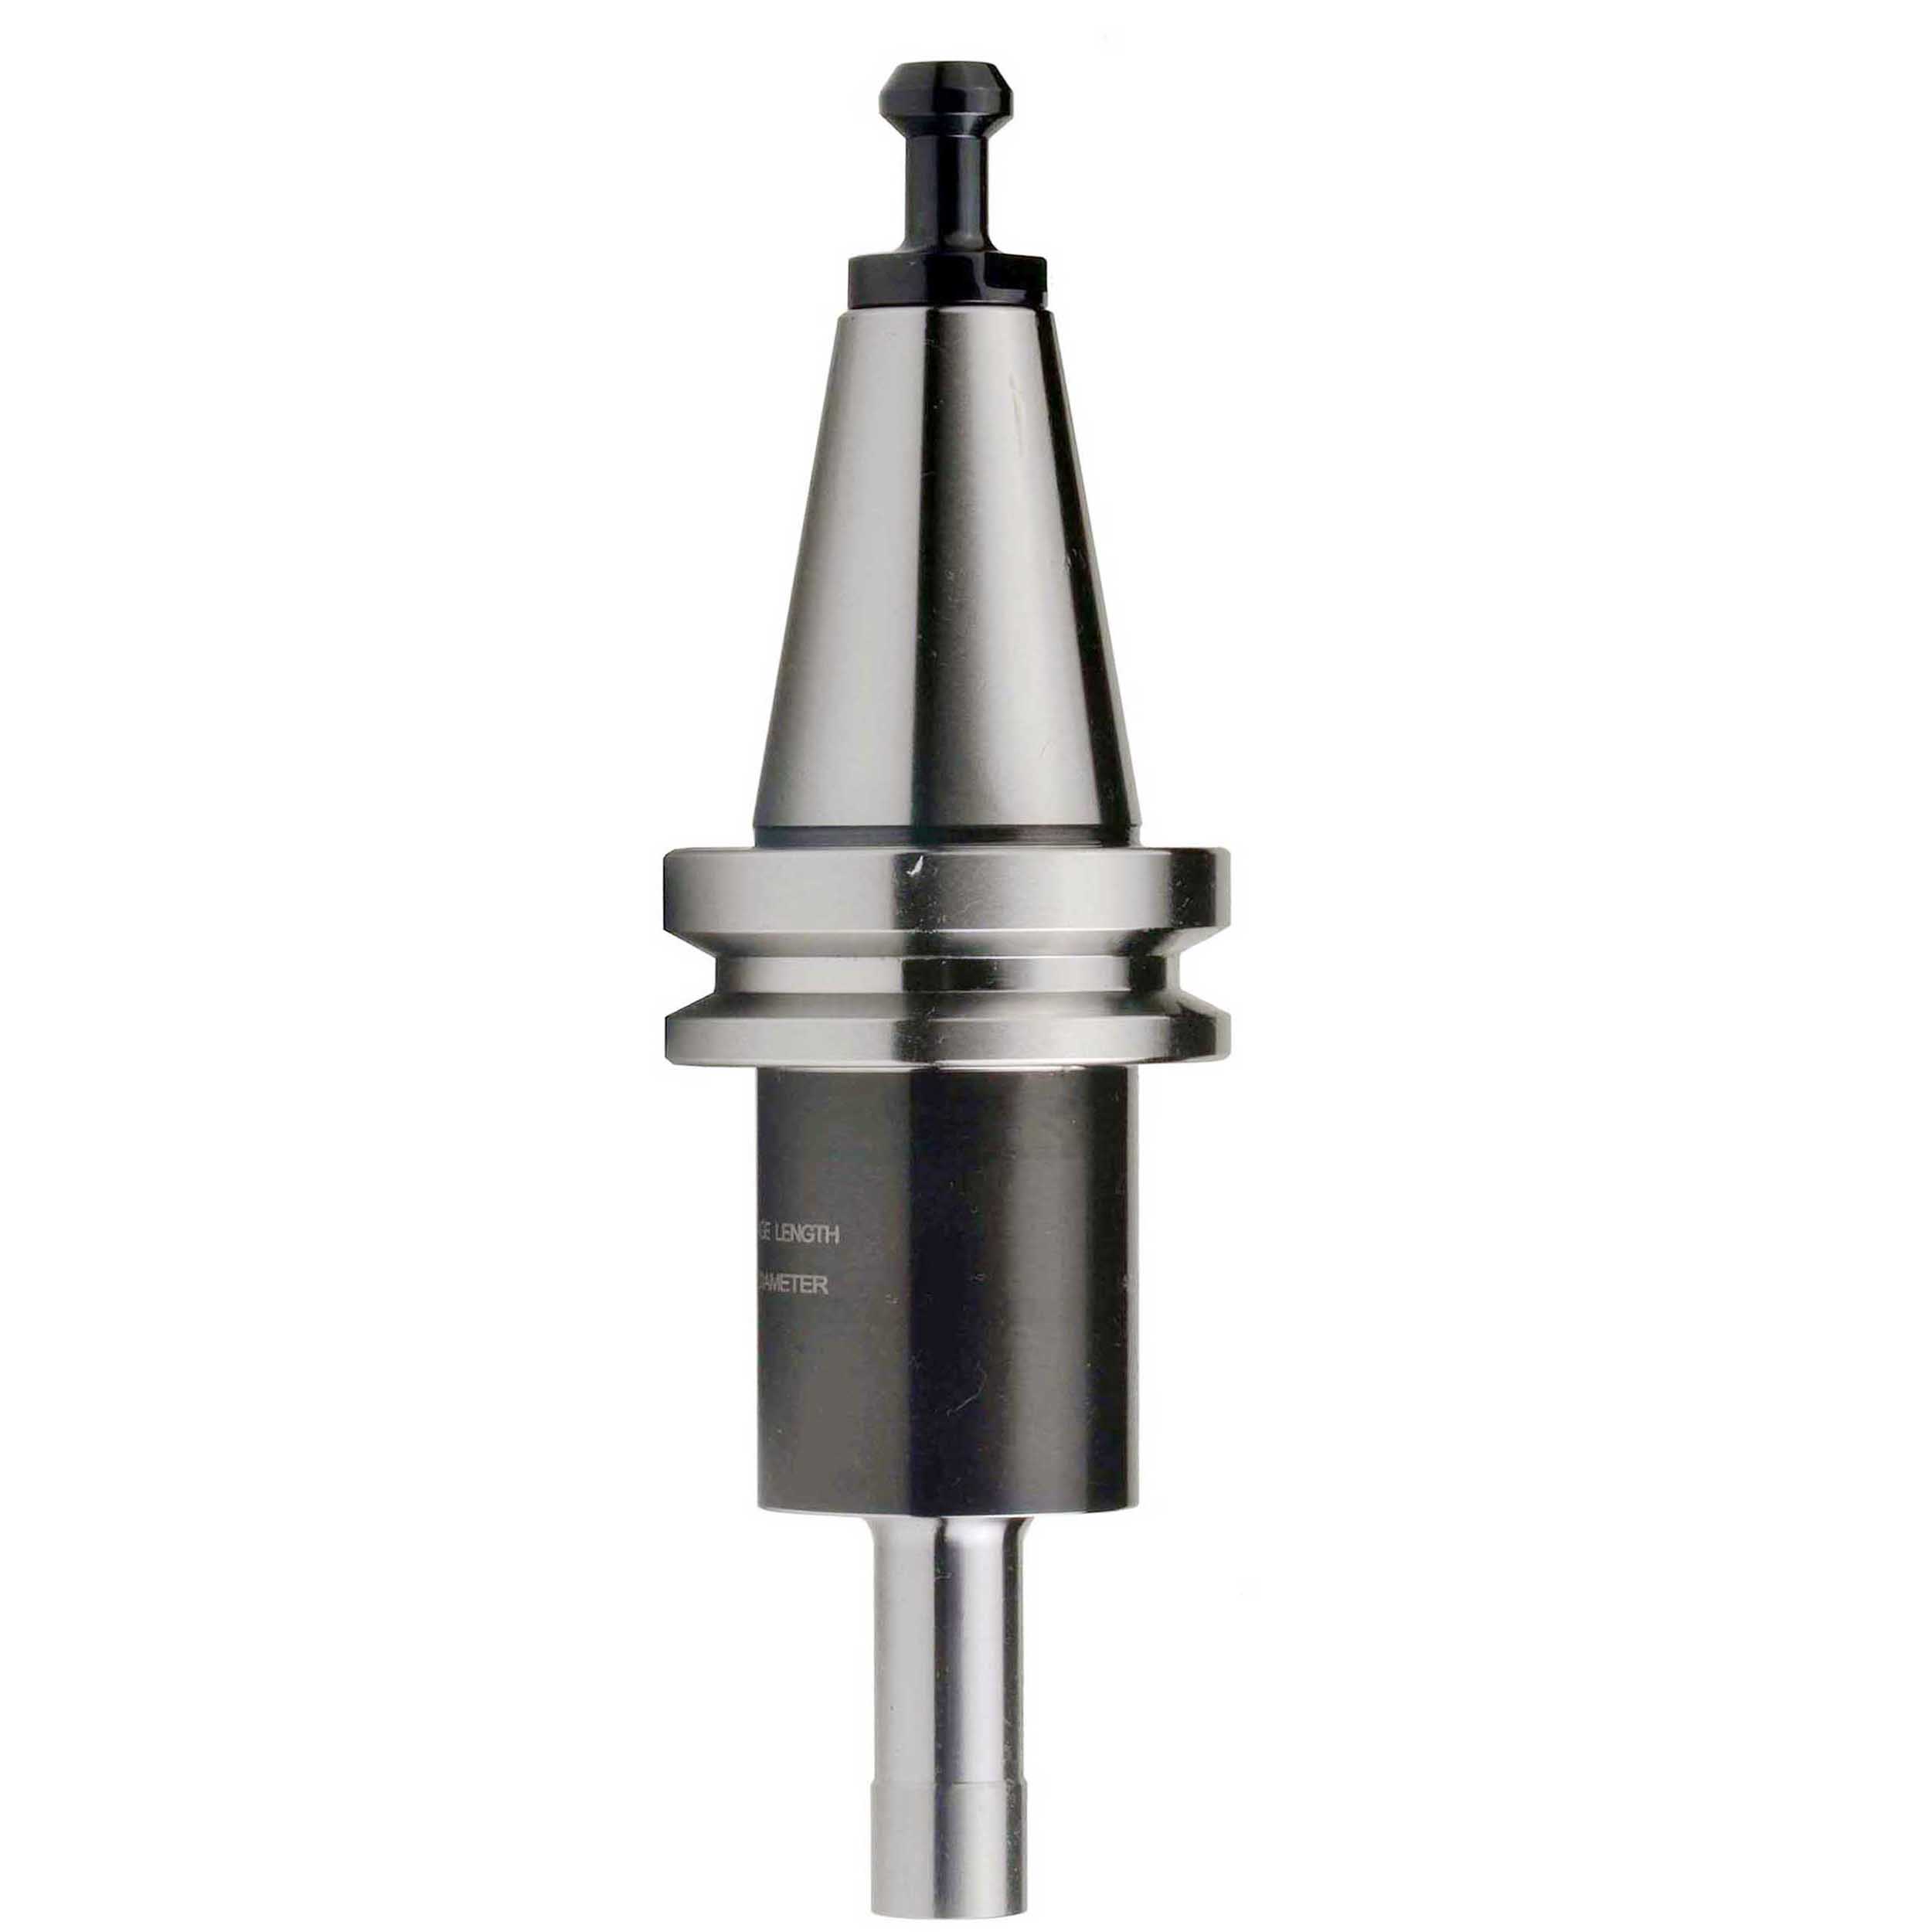 P69 with Retention Adapter 1/4" for Holding Probe BT30 Taper 